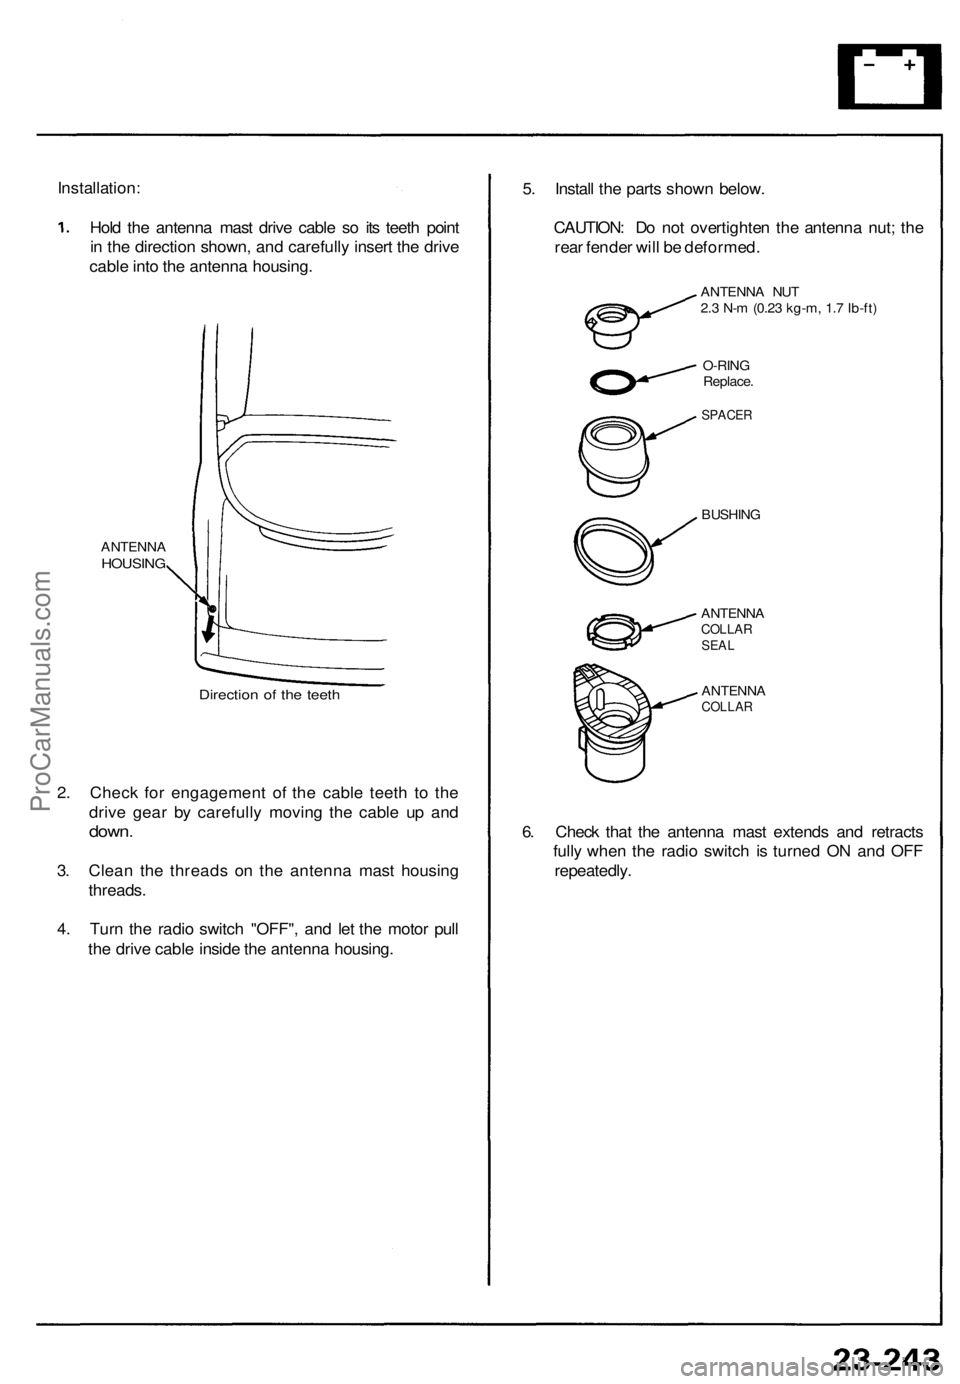 ACURA NSX 1991  Service Repair Manual 
Installation:

Hold the antenna mast drive cable so its teeth point

in the direction shown, and carefully insert the drive

cable into the antenna housing.

ANTENNA

HOUSING

Direction of the teeth
